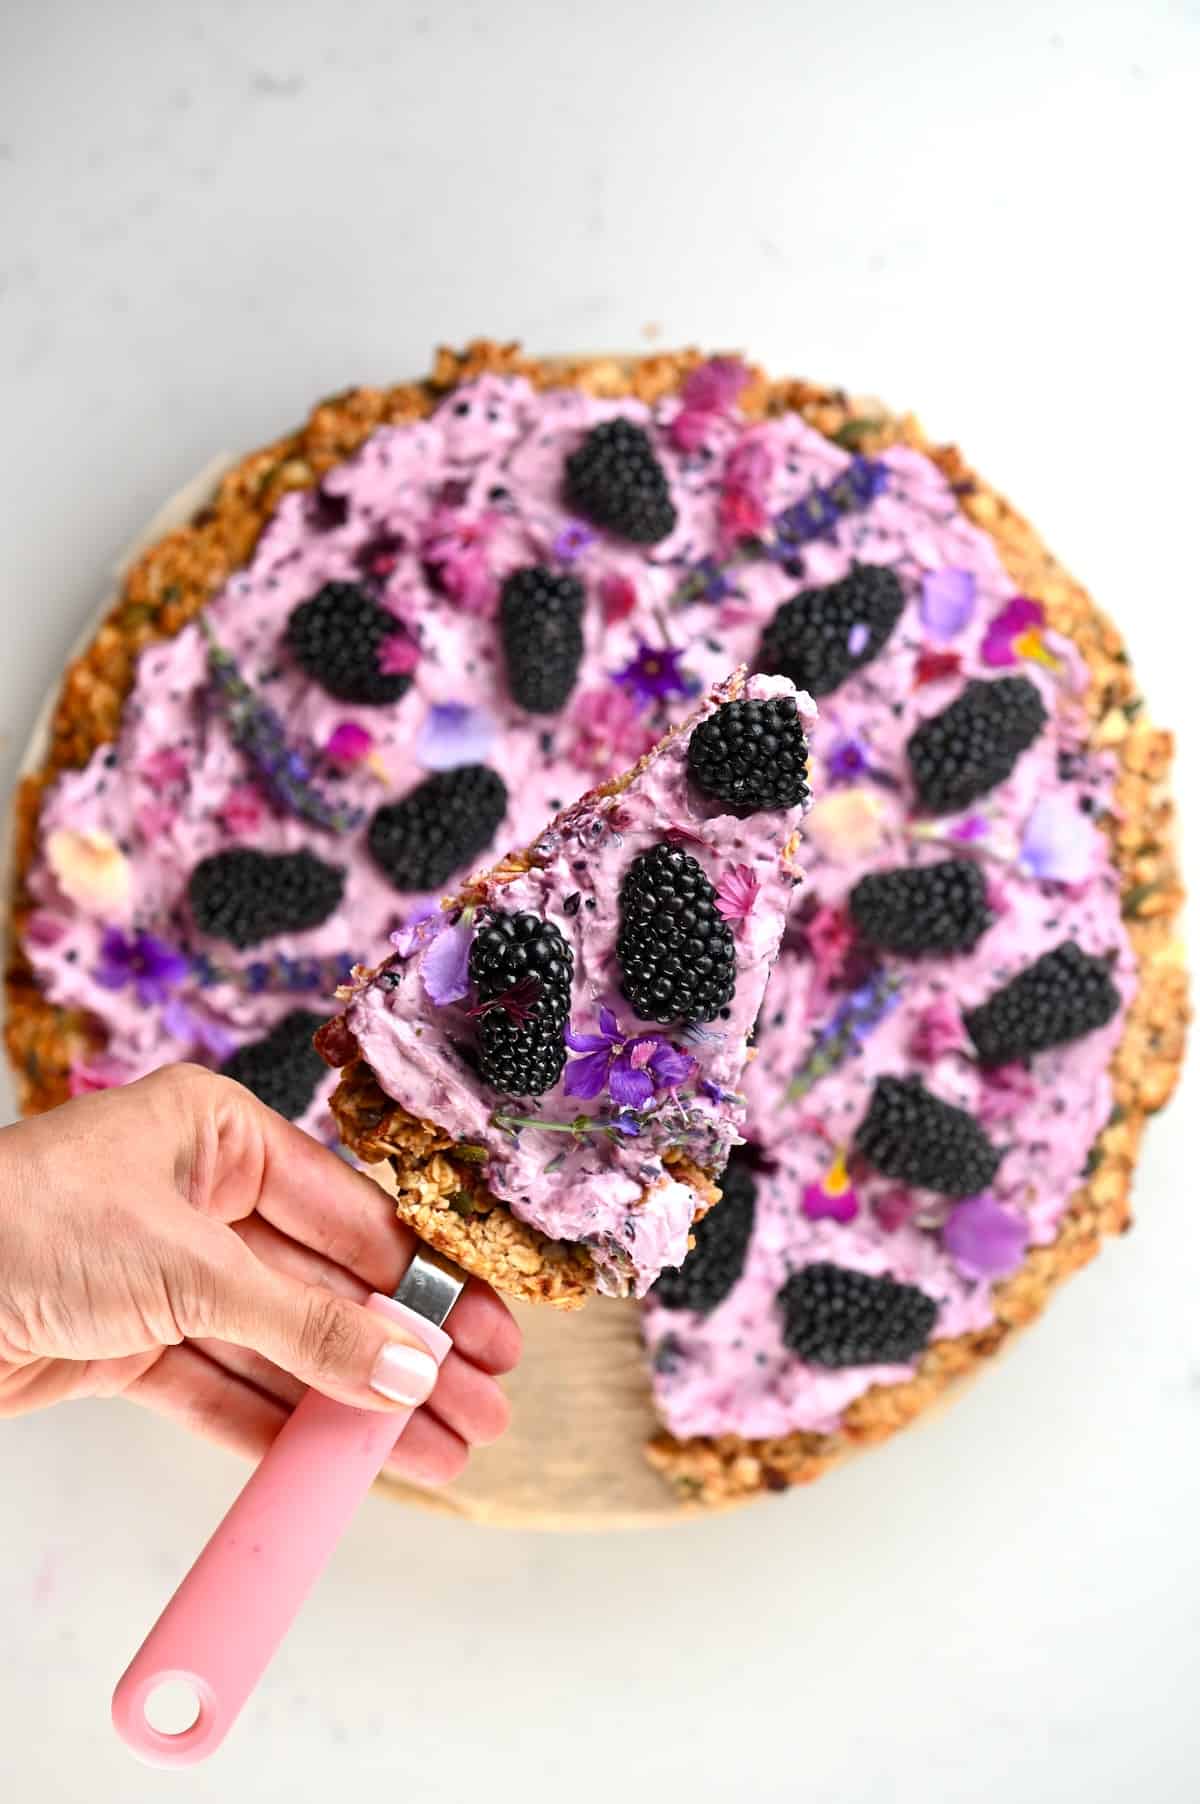 Top view of Blackberry granola pizza with a slice on a spetula